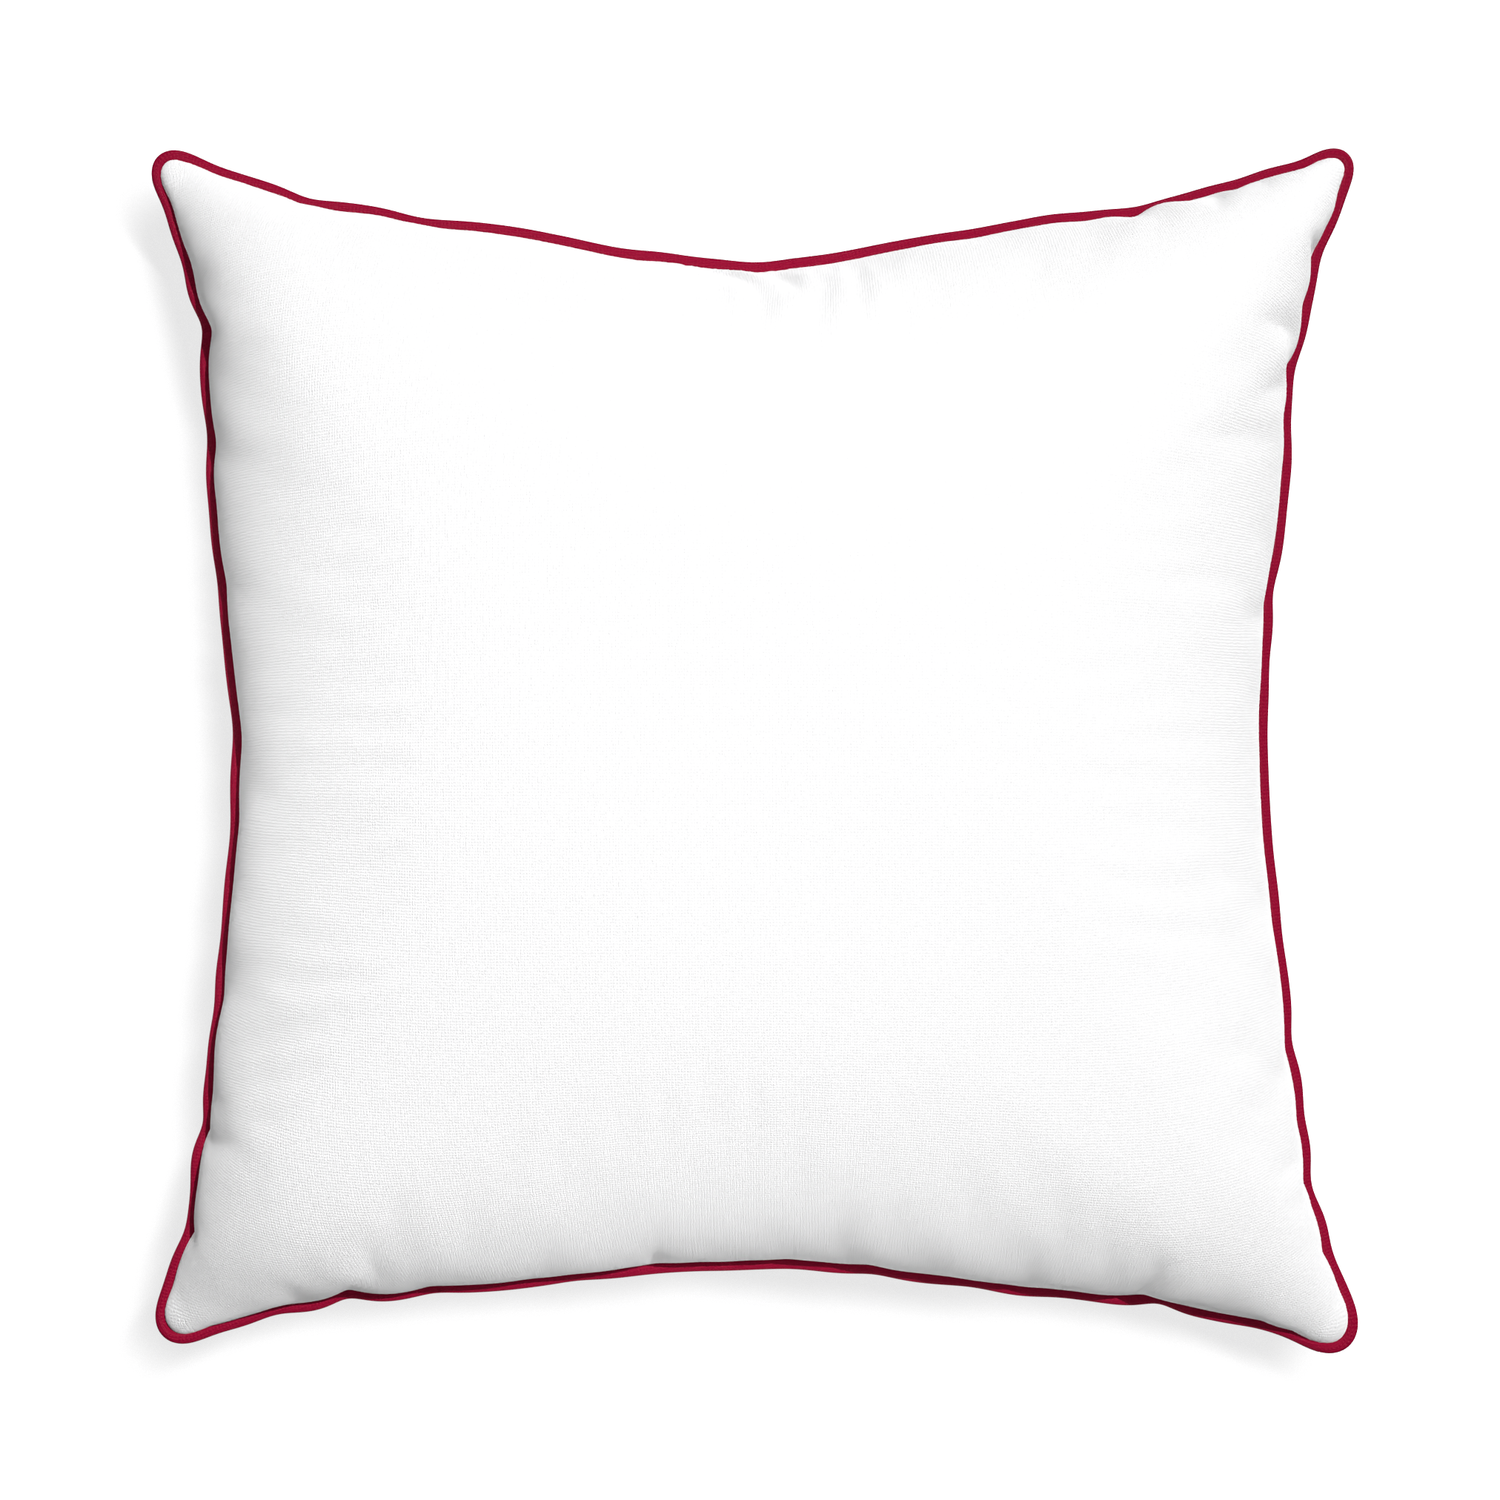 Euro-sham snow custom pillow with raspberry piping on white background